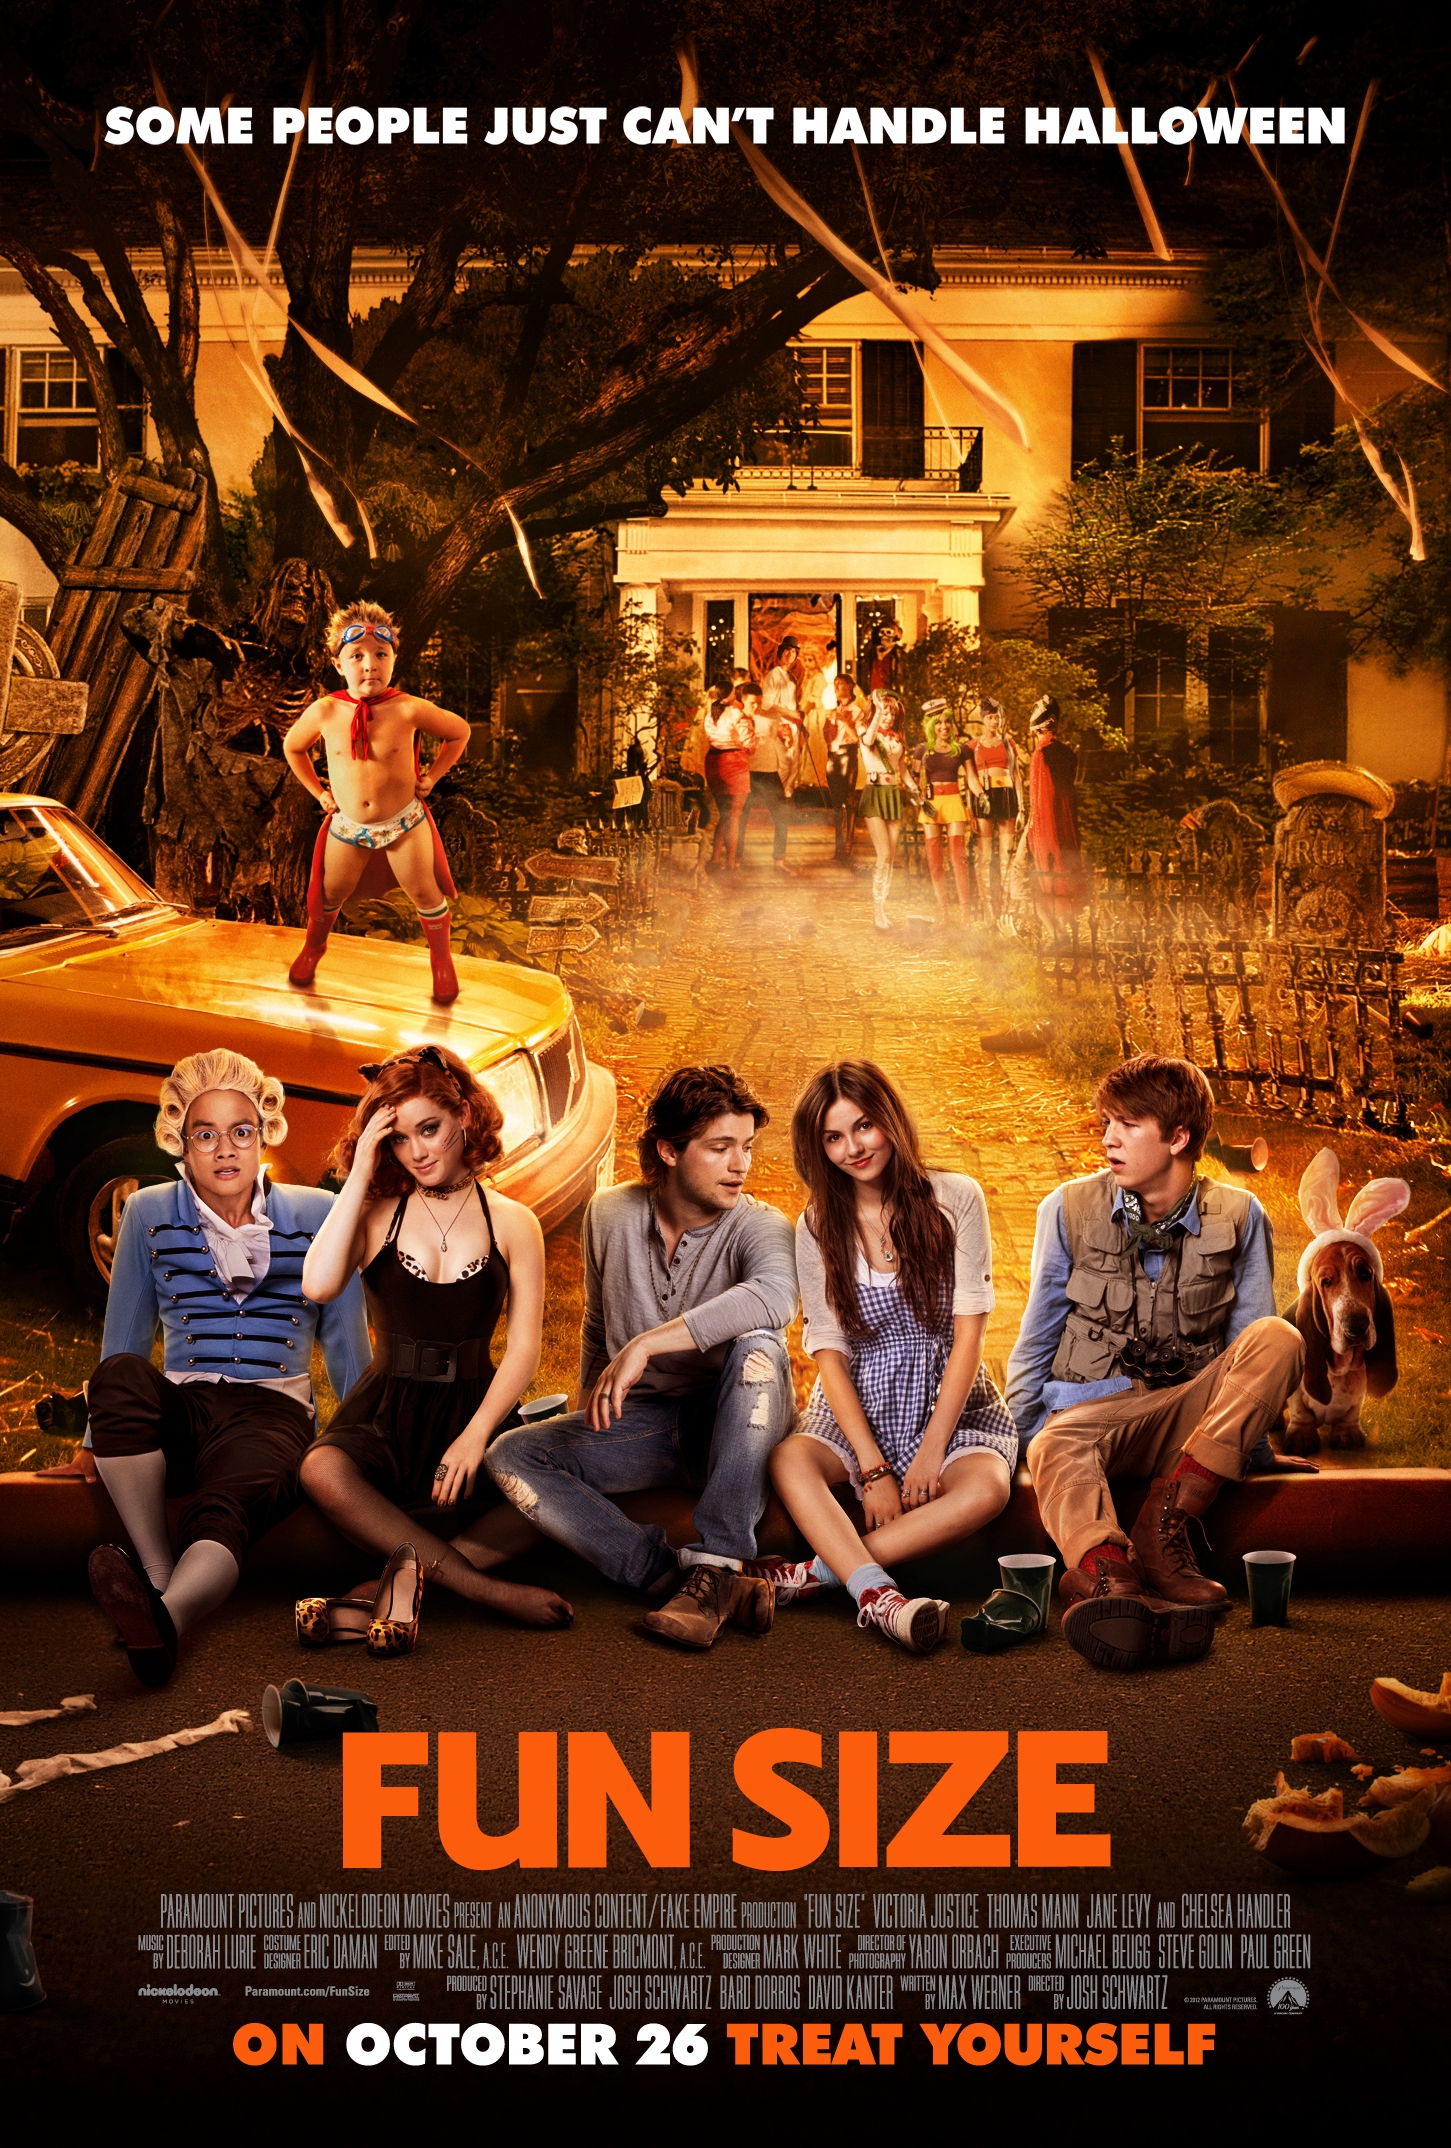 Thomas McDonell in Fun Size